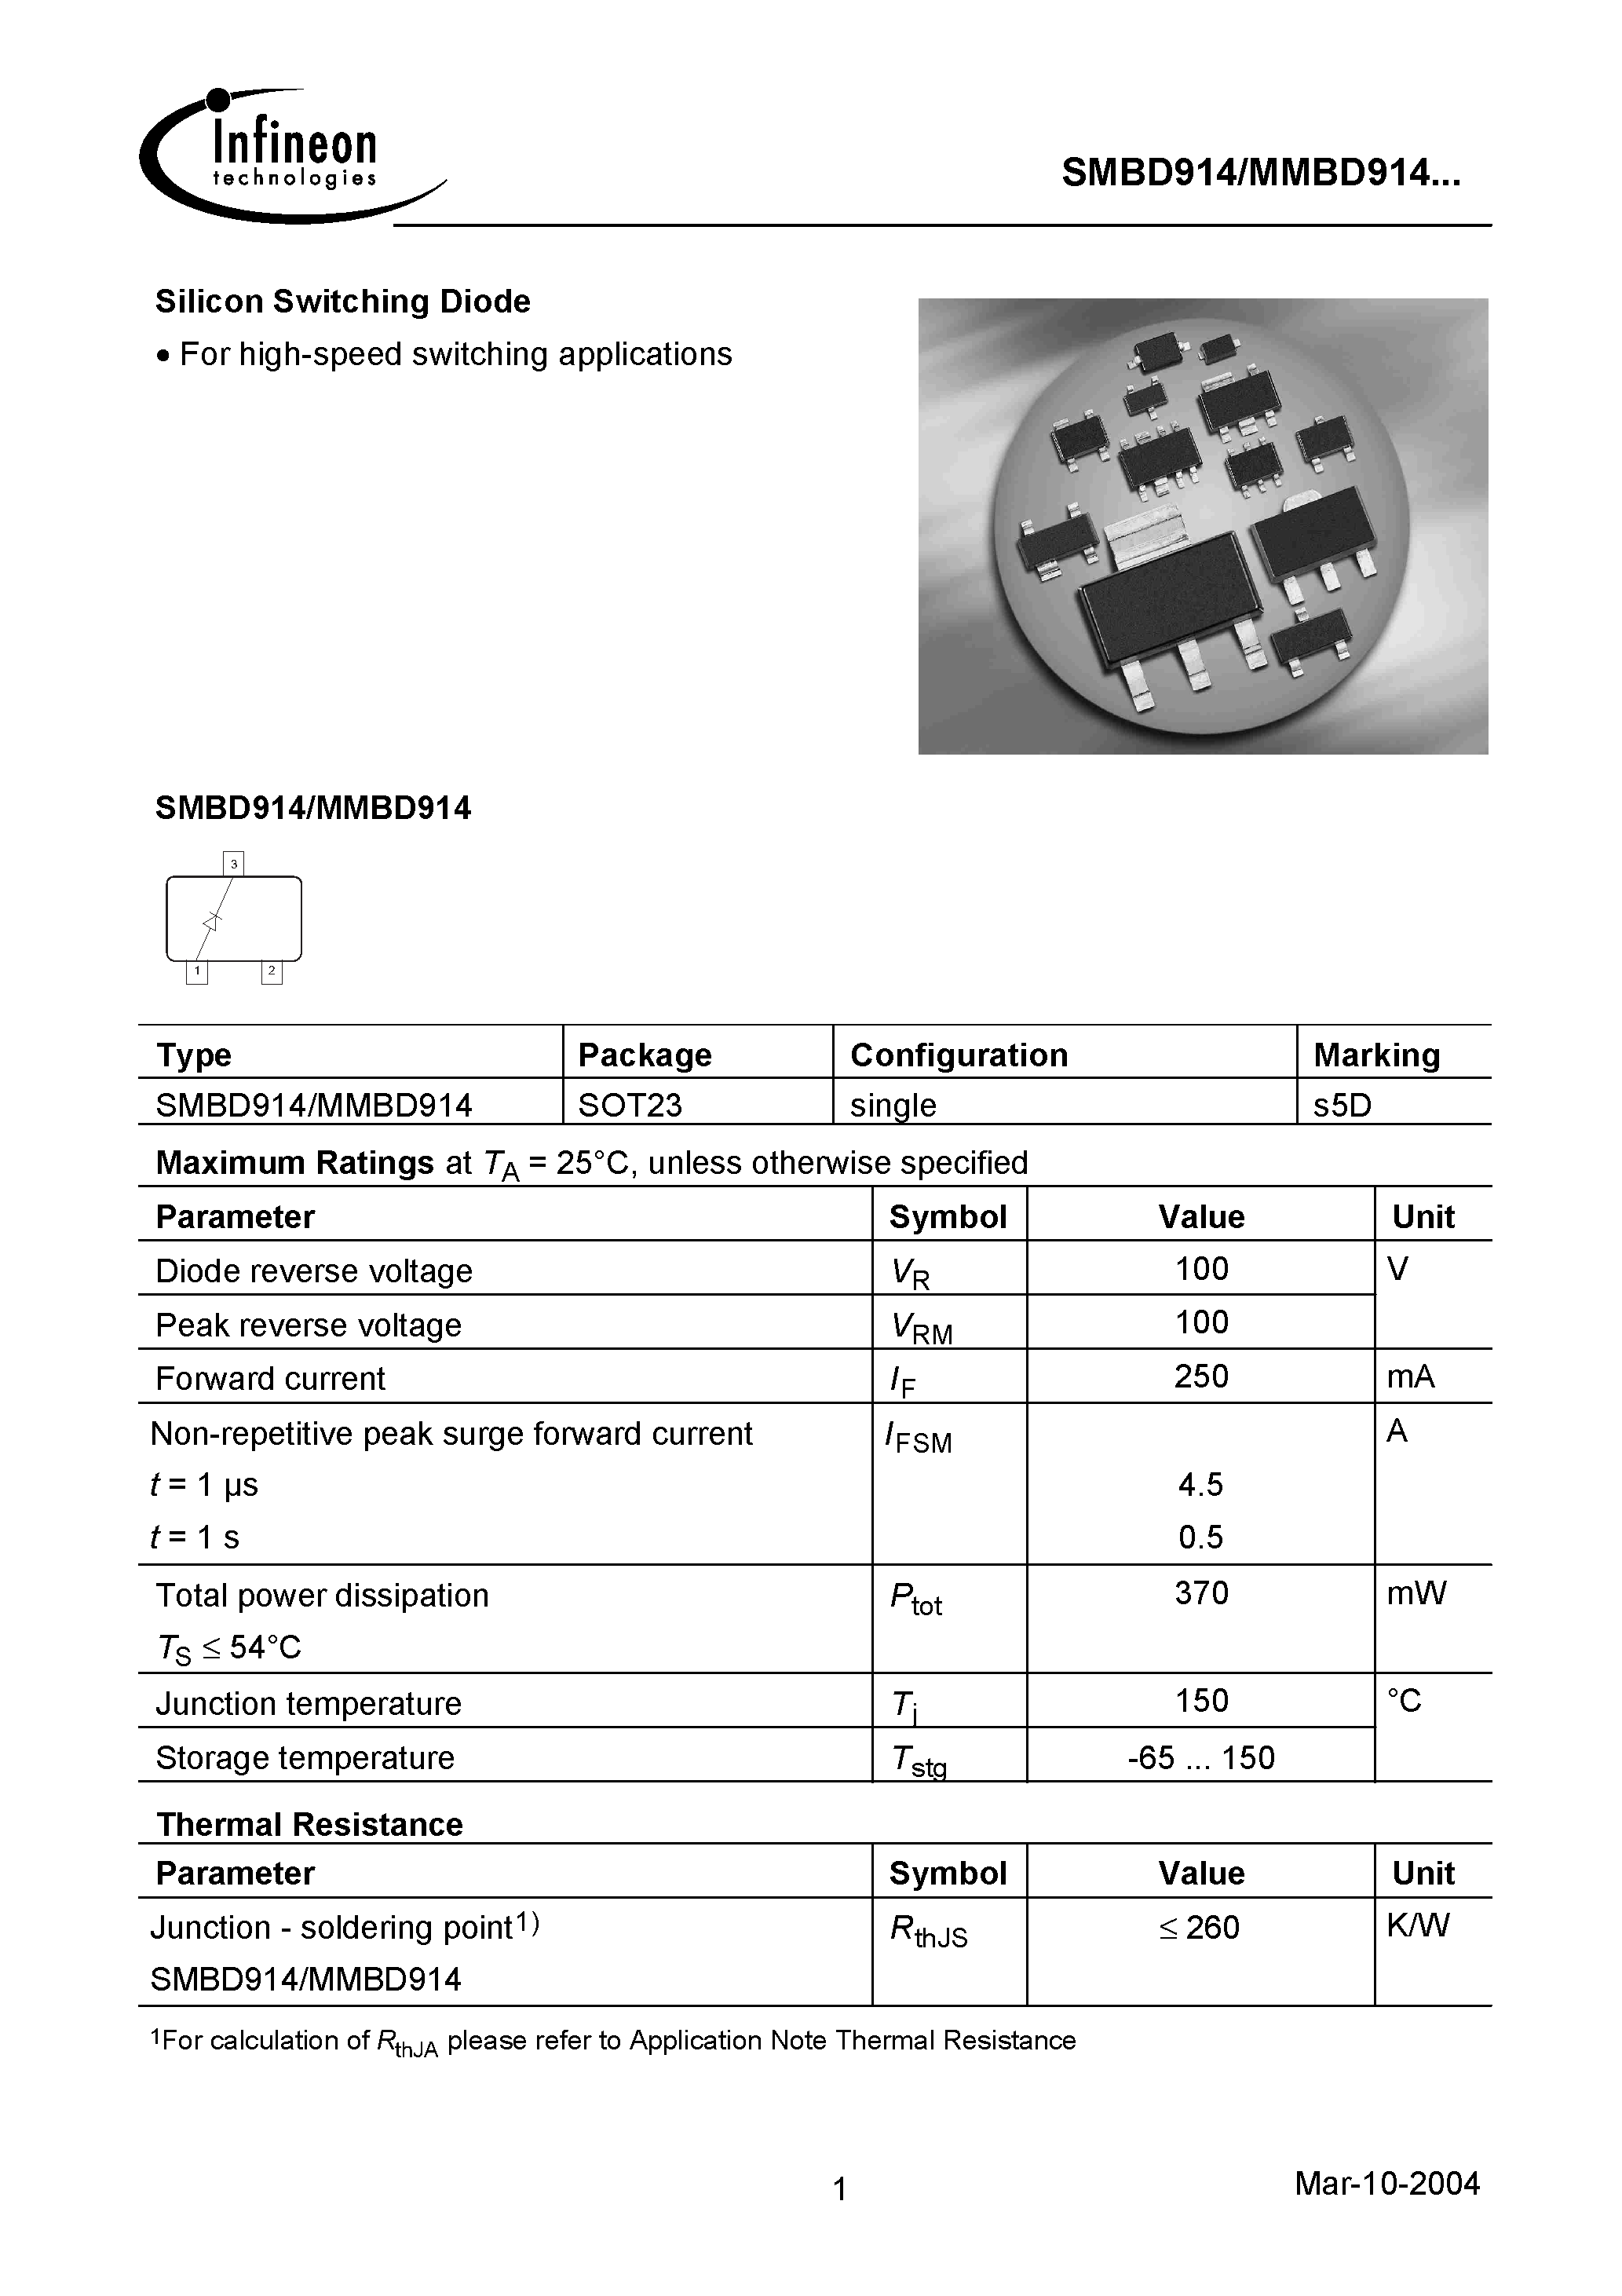 Даташит MMBD914 - Silicon Switching Diode страница 1